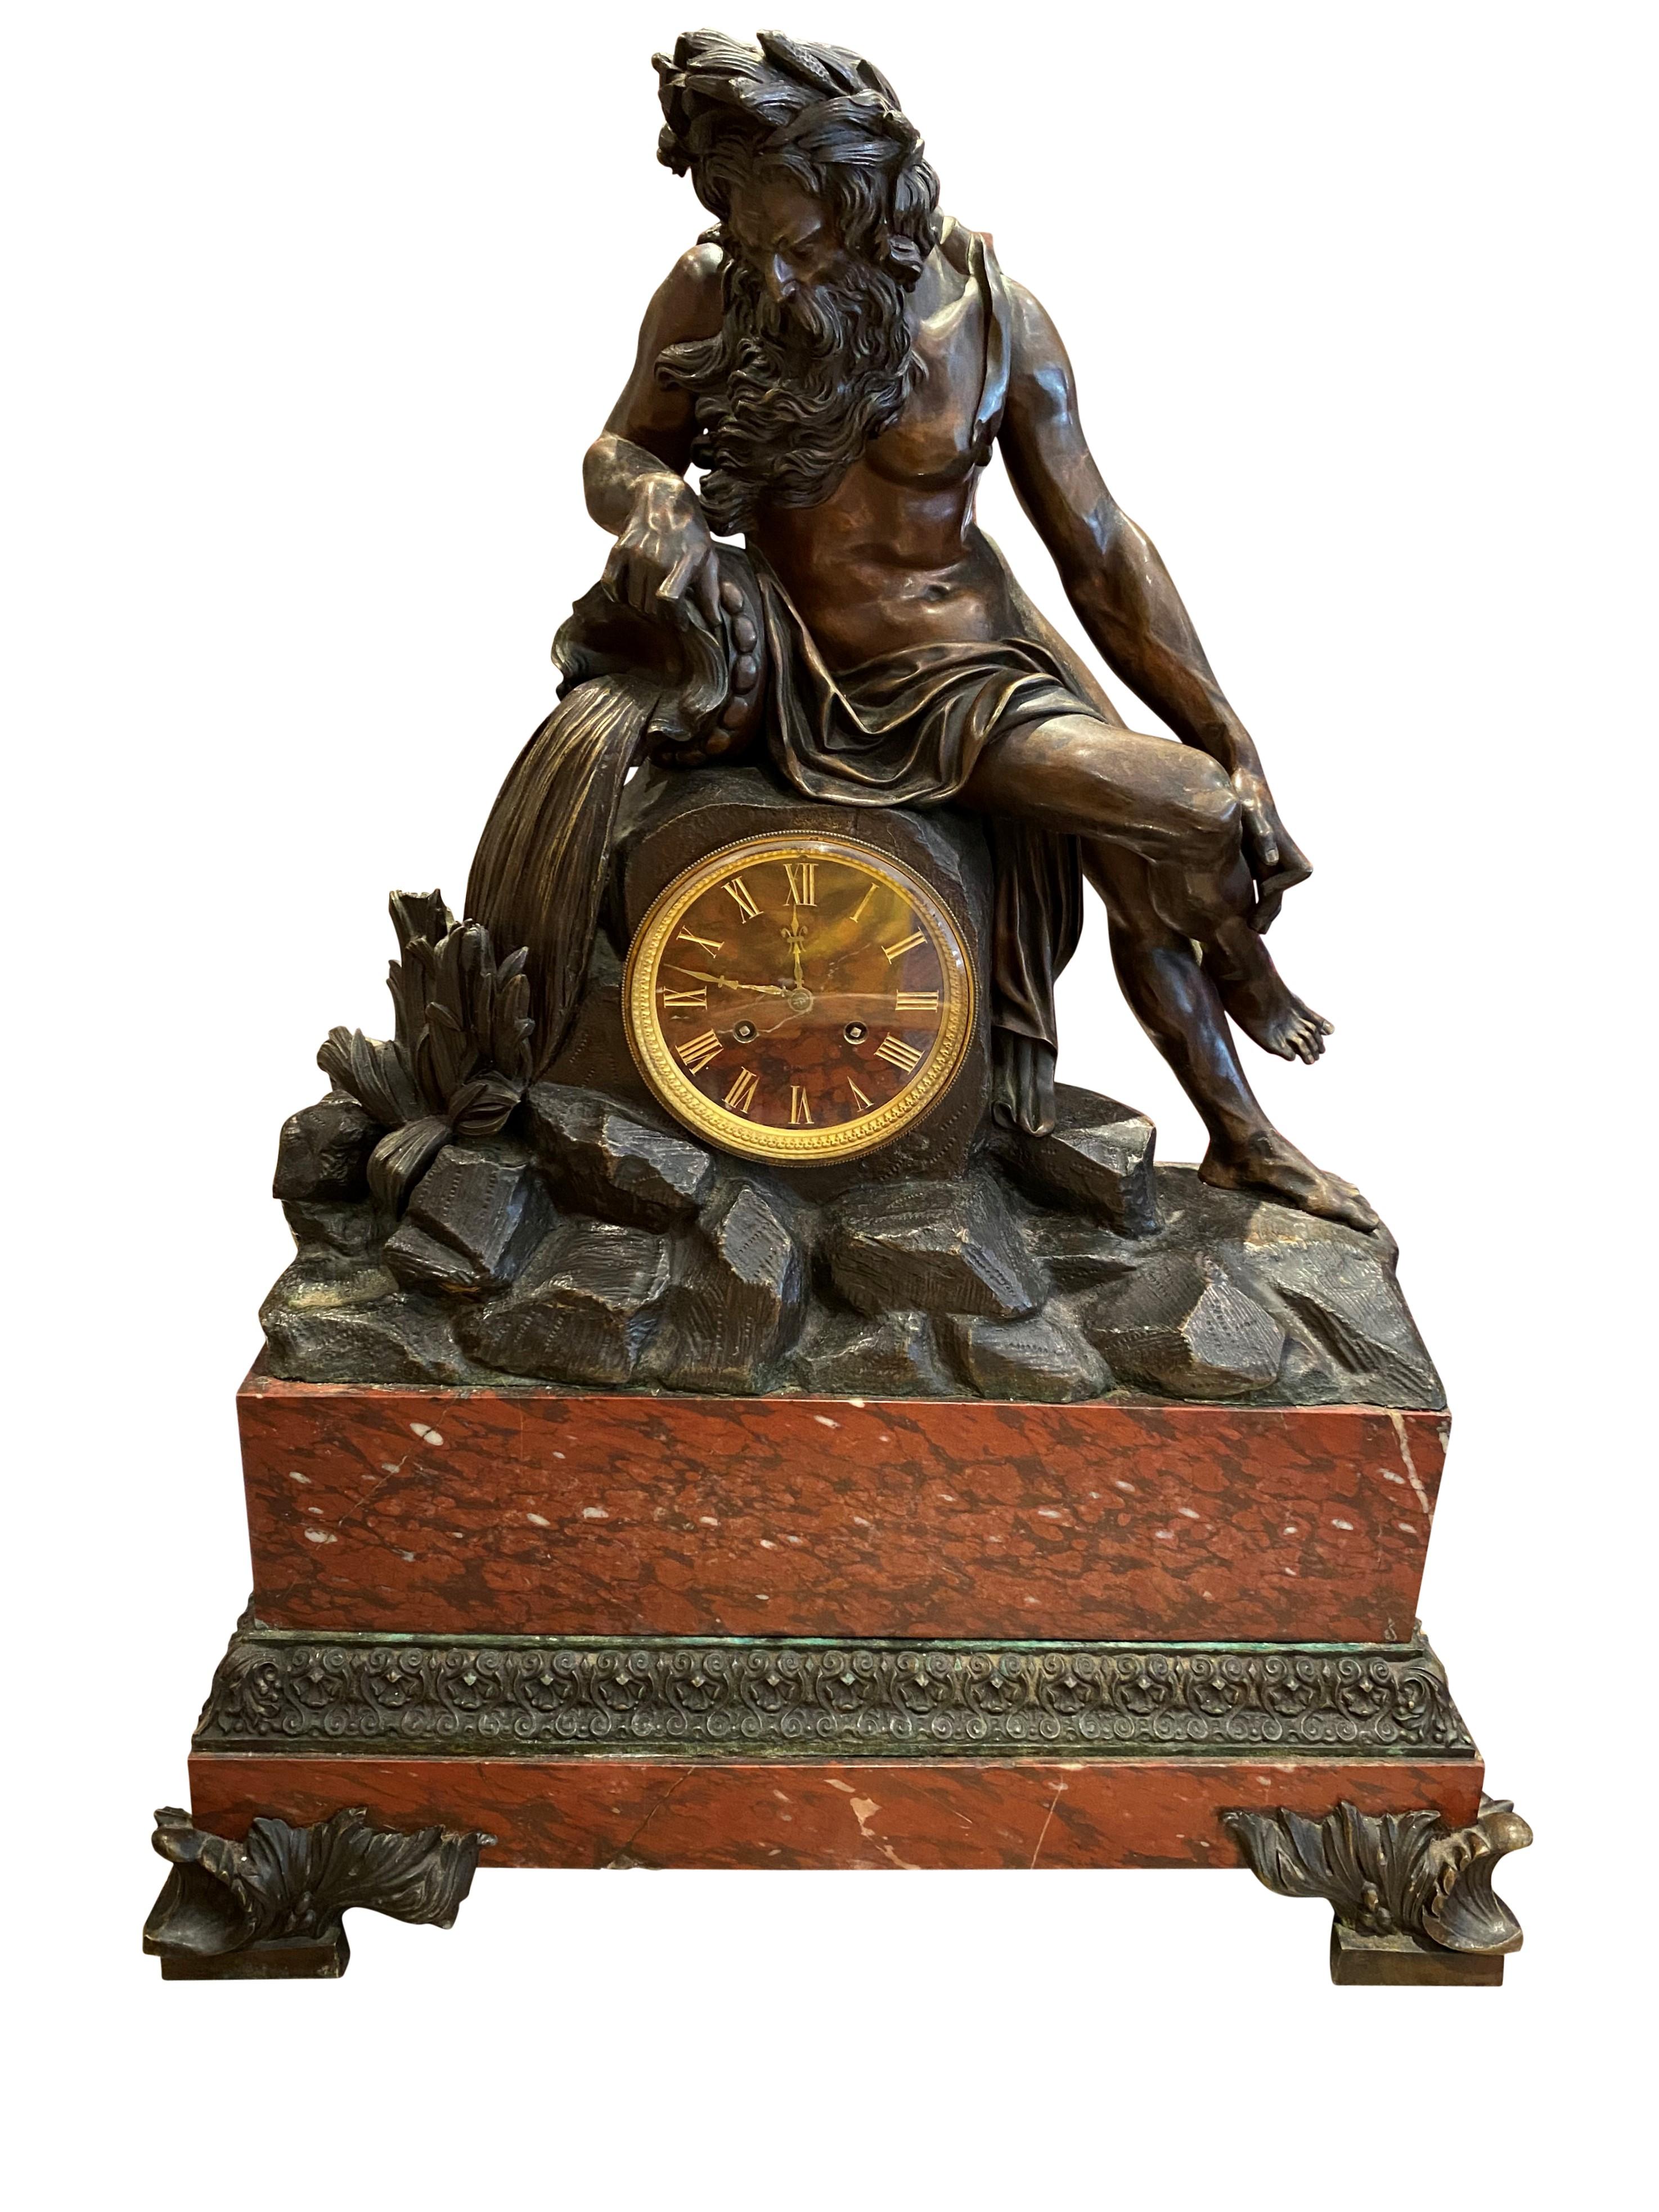 A rare French gilt and patinated bronze mantle clock with on top a statue of Neptune, on a rouge imperial marble base, circa 1860s (1880). This impressive piece stands over 2.6 feet tall. A monumental piece, perfect for home decoration, with